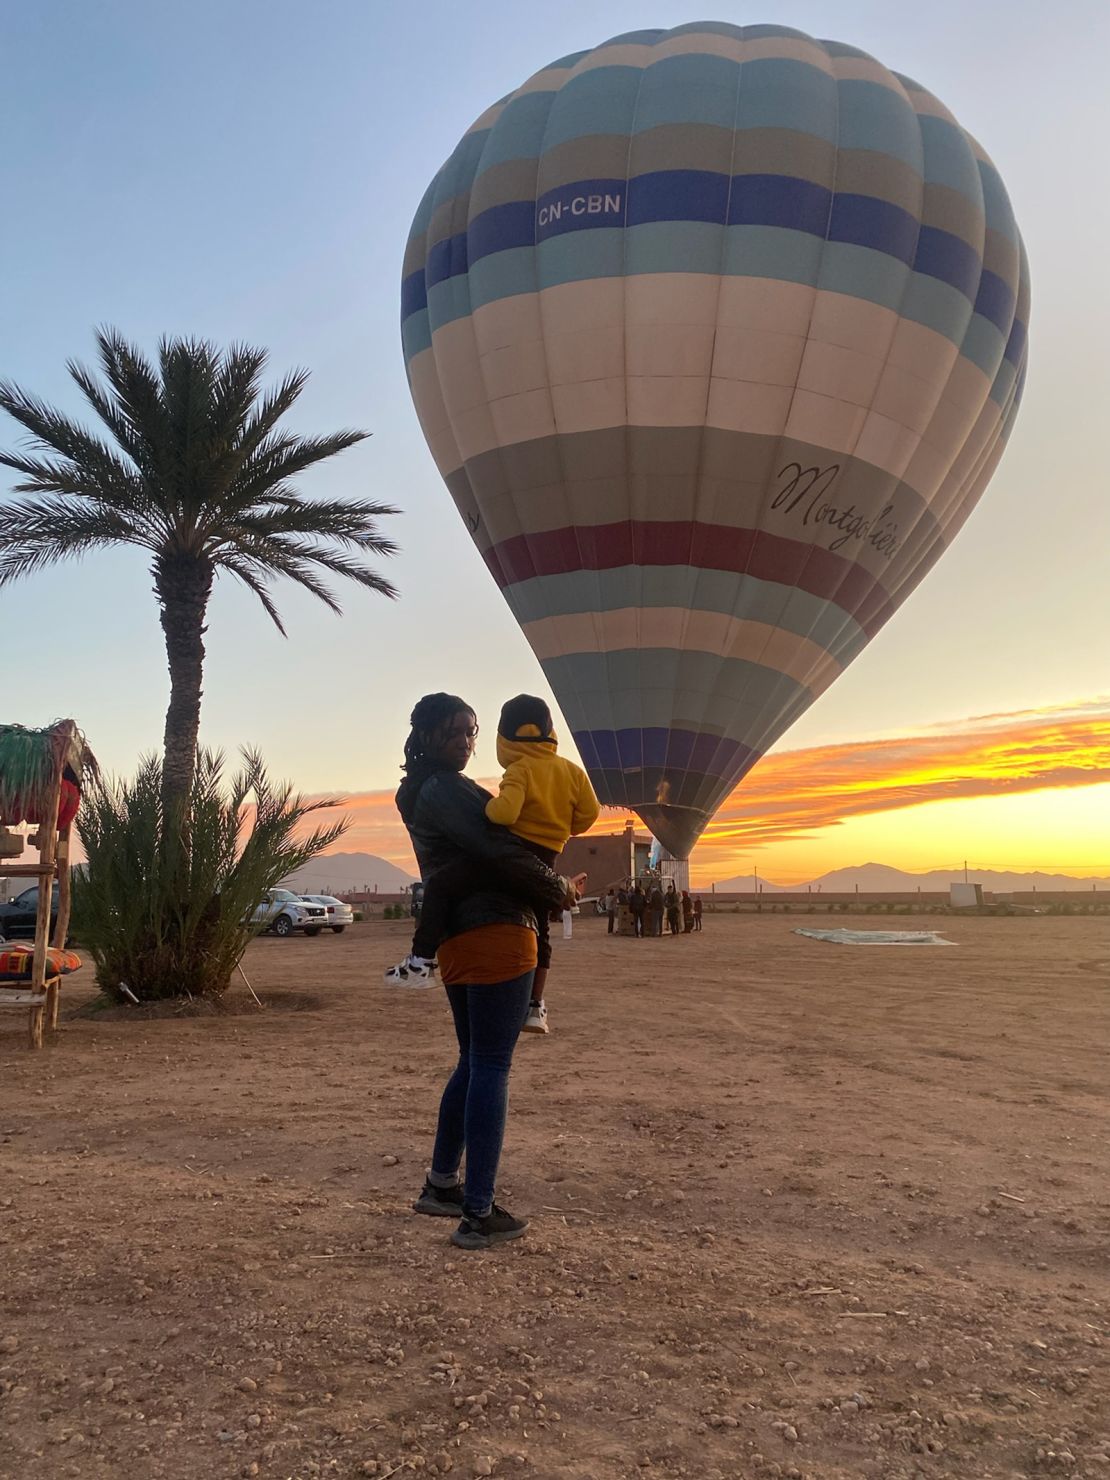 The family spent last Christmas in Morocco, and took a hot air balloon ride while in Marrakech.